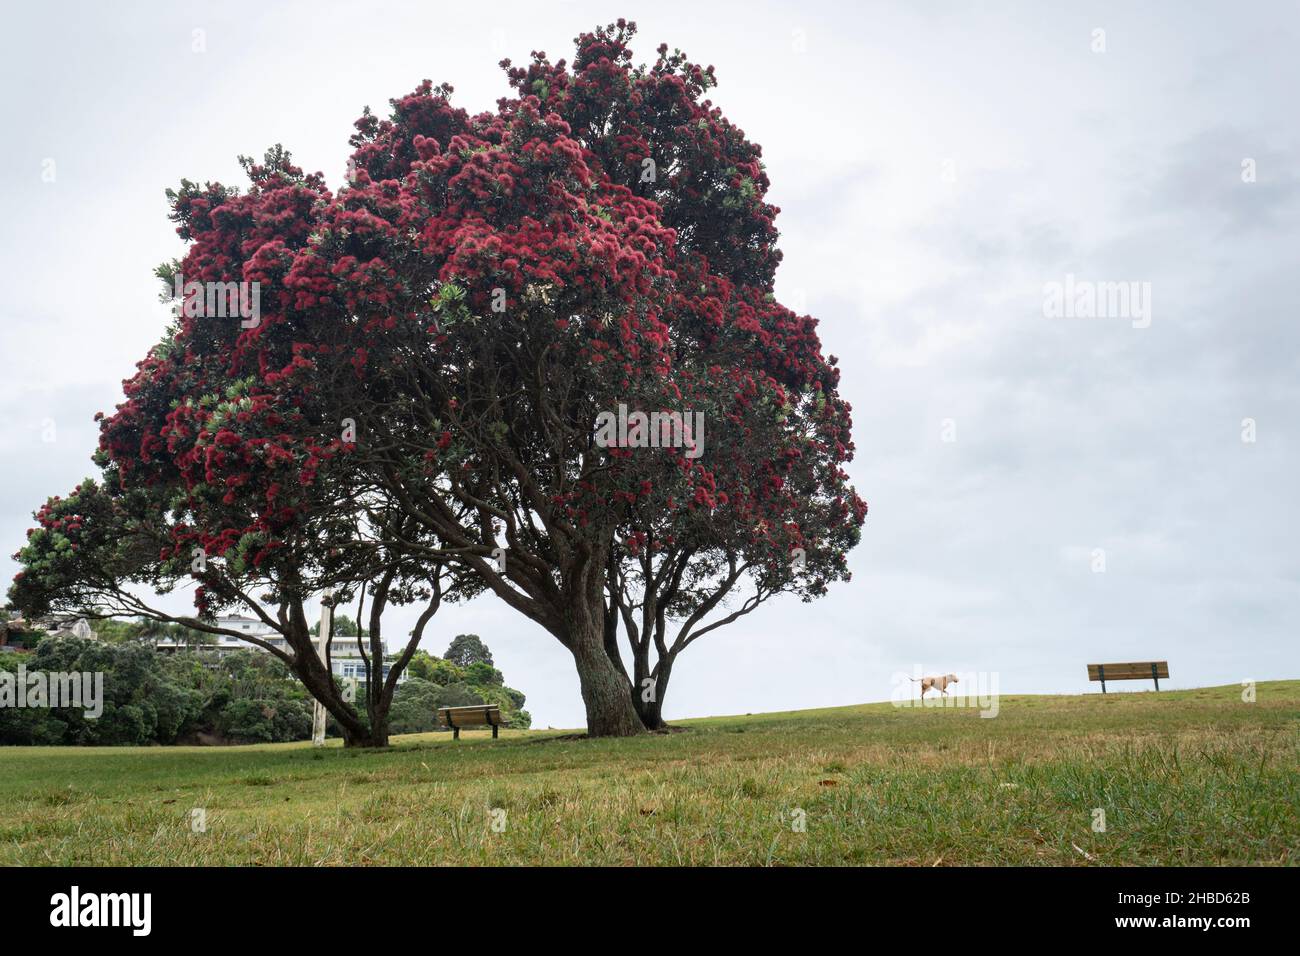 Milford beach in a cloudy day with flowering Pohutukawa tree and a dog. New Zealand Christmas Tree in full bloom. Stock Photo